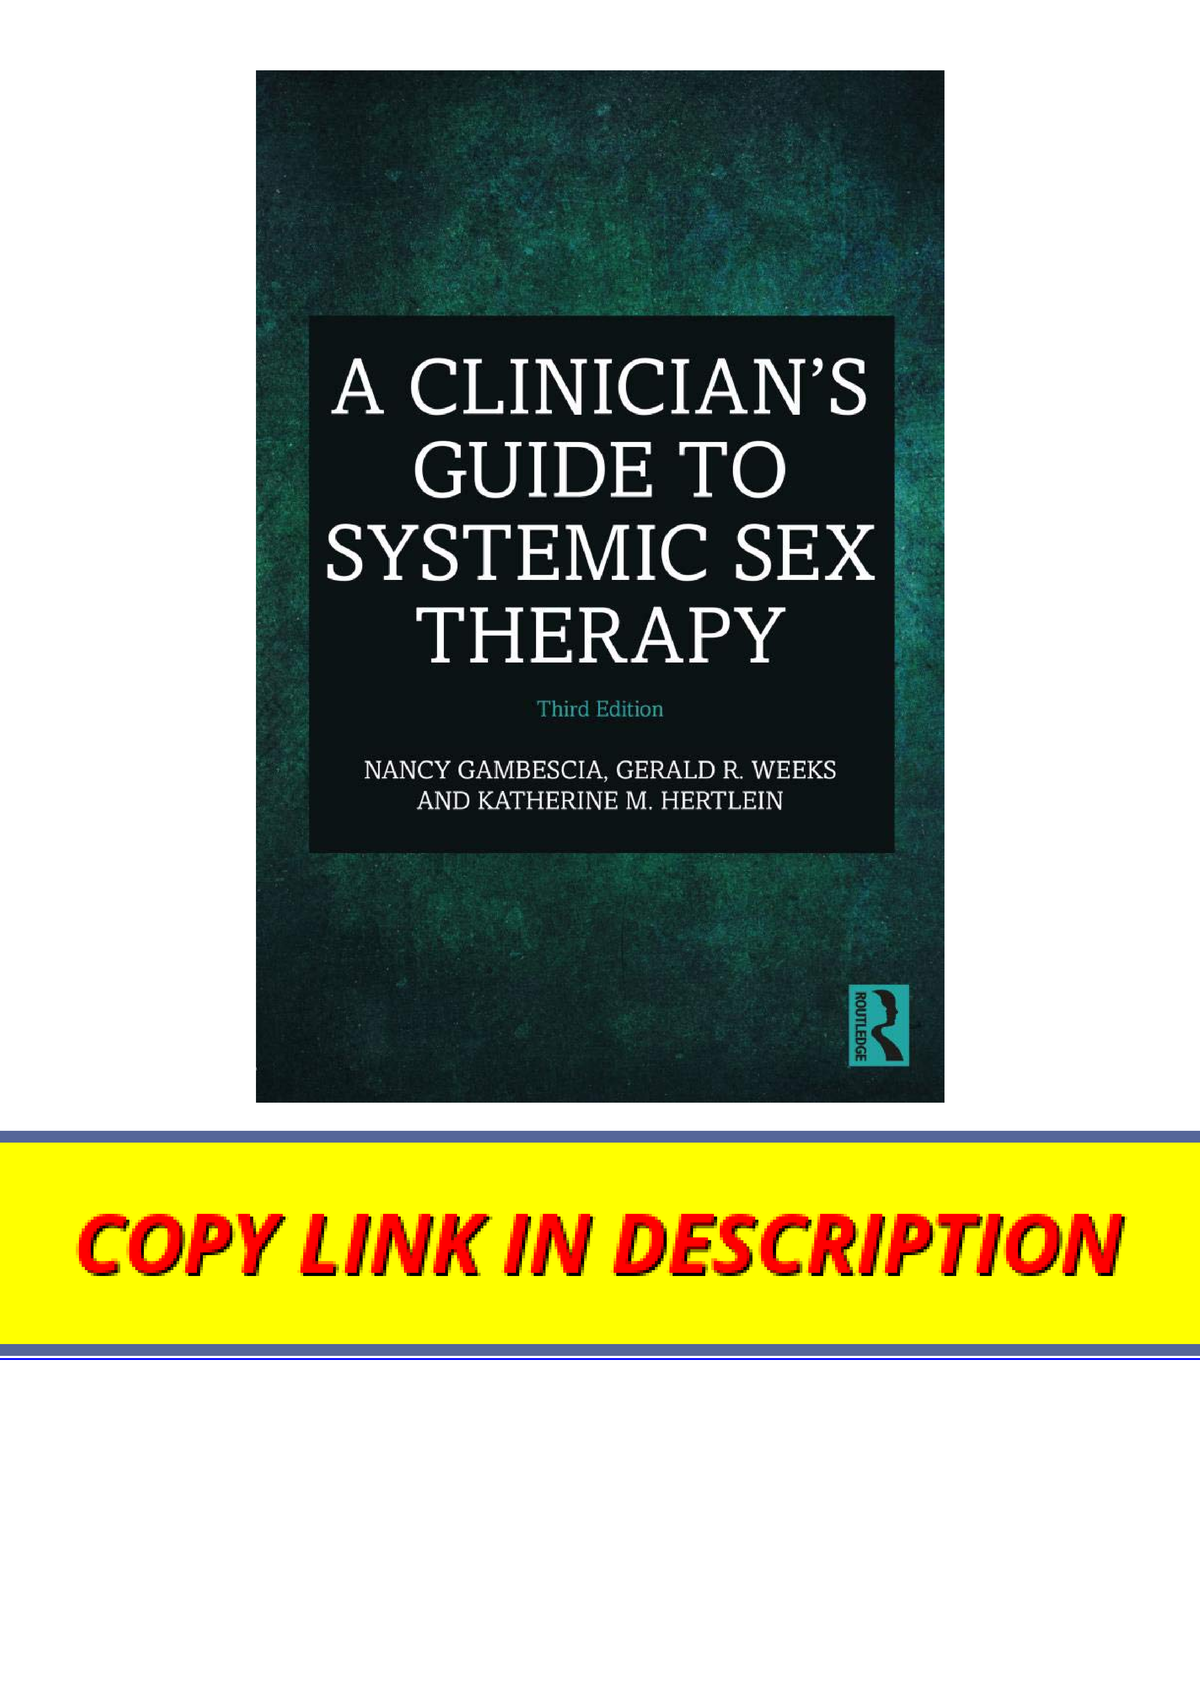 Ebook Download A Clinicians Guide To Systemic Sex Therapy For Android Ebook Download A 7543